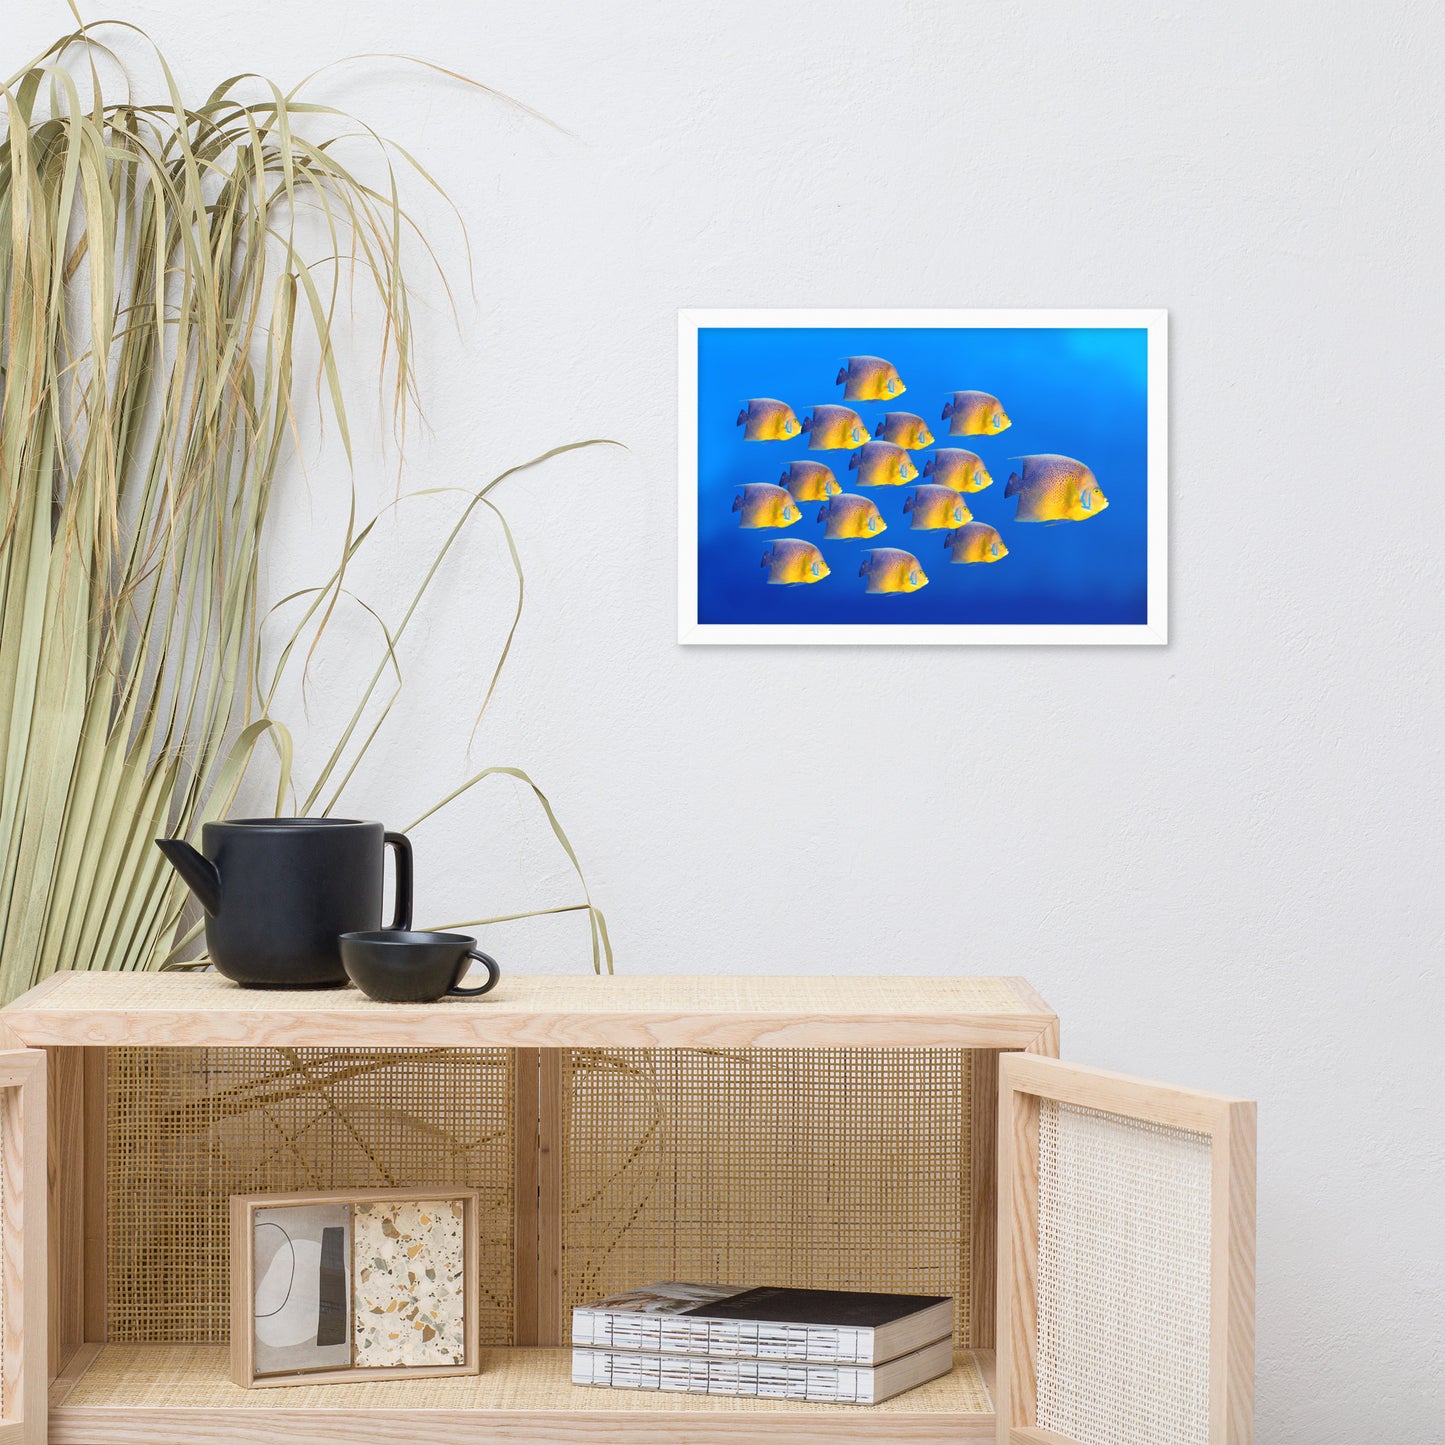 School of Tropical Coral Fish Angelfish Isolated In Blue Ocean Water Animal Wildlife Photograph Framed Wall Art Prints